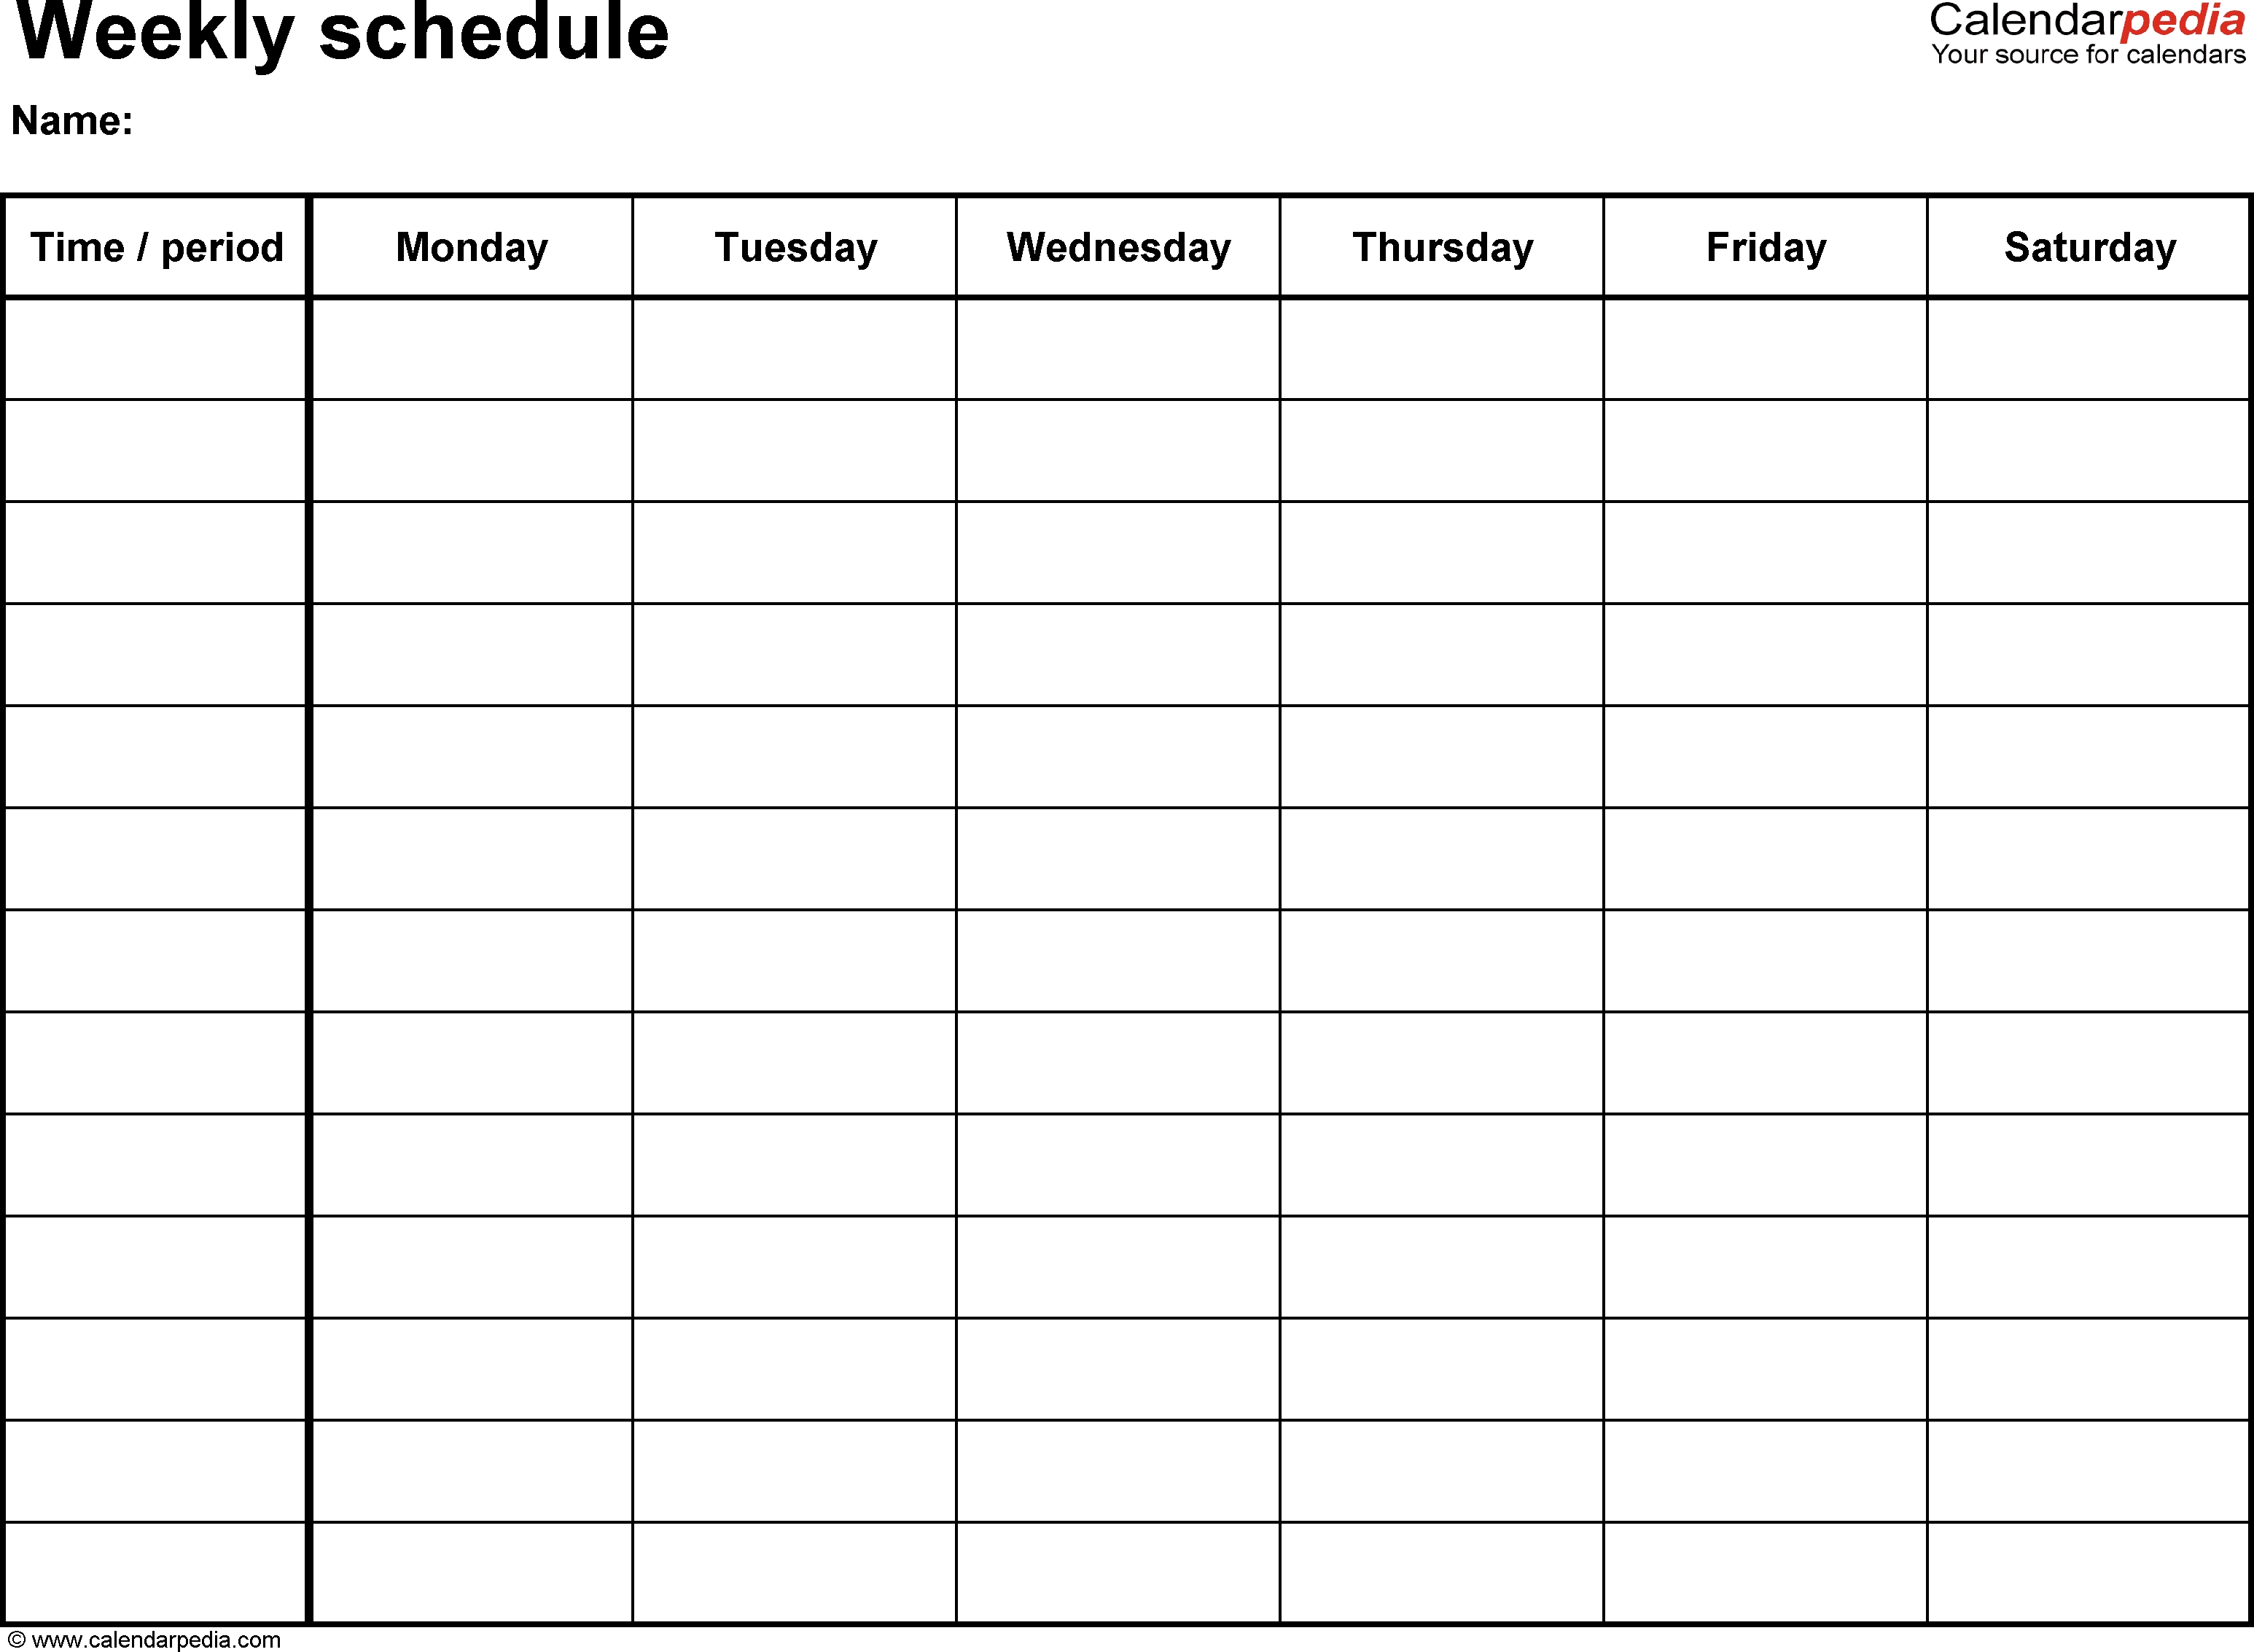 Free Weekly Schedule Templates For Excel - 18 Templates inside Weekly Calander Lesson Plan Template